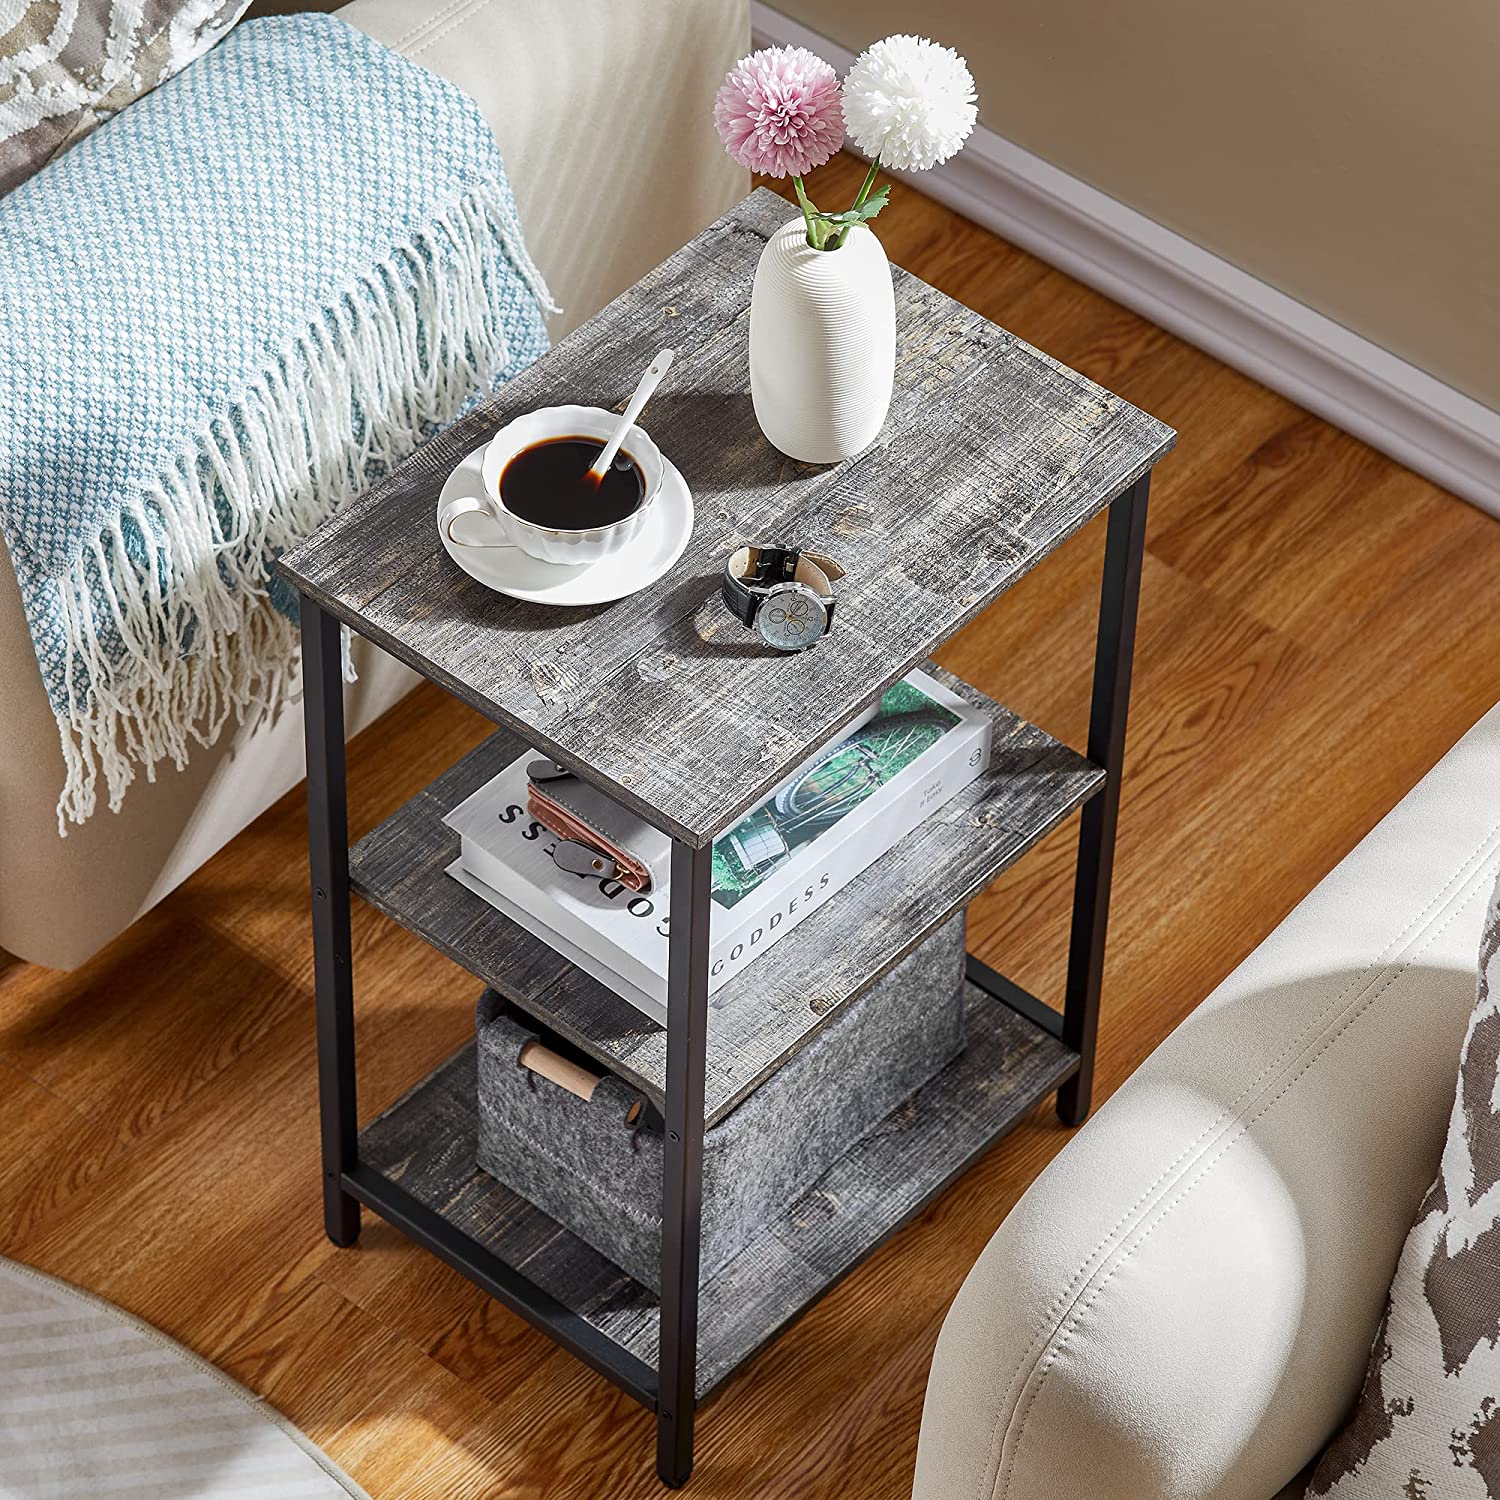 VECELO End Side Table with Storage Shelves Industrial Night Stand, 3-Tier Slim Nightstand for Living Room, Bedroom